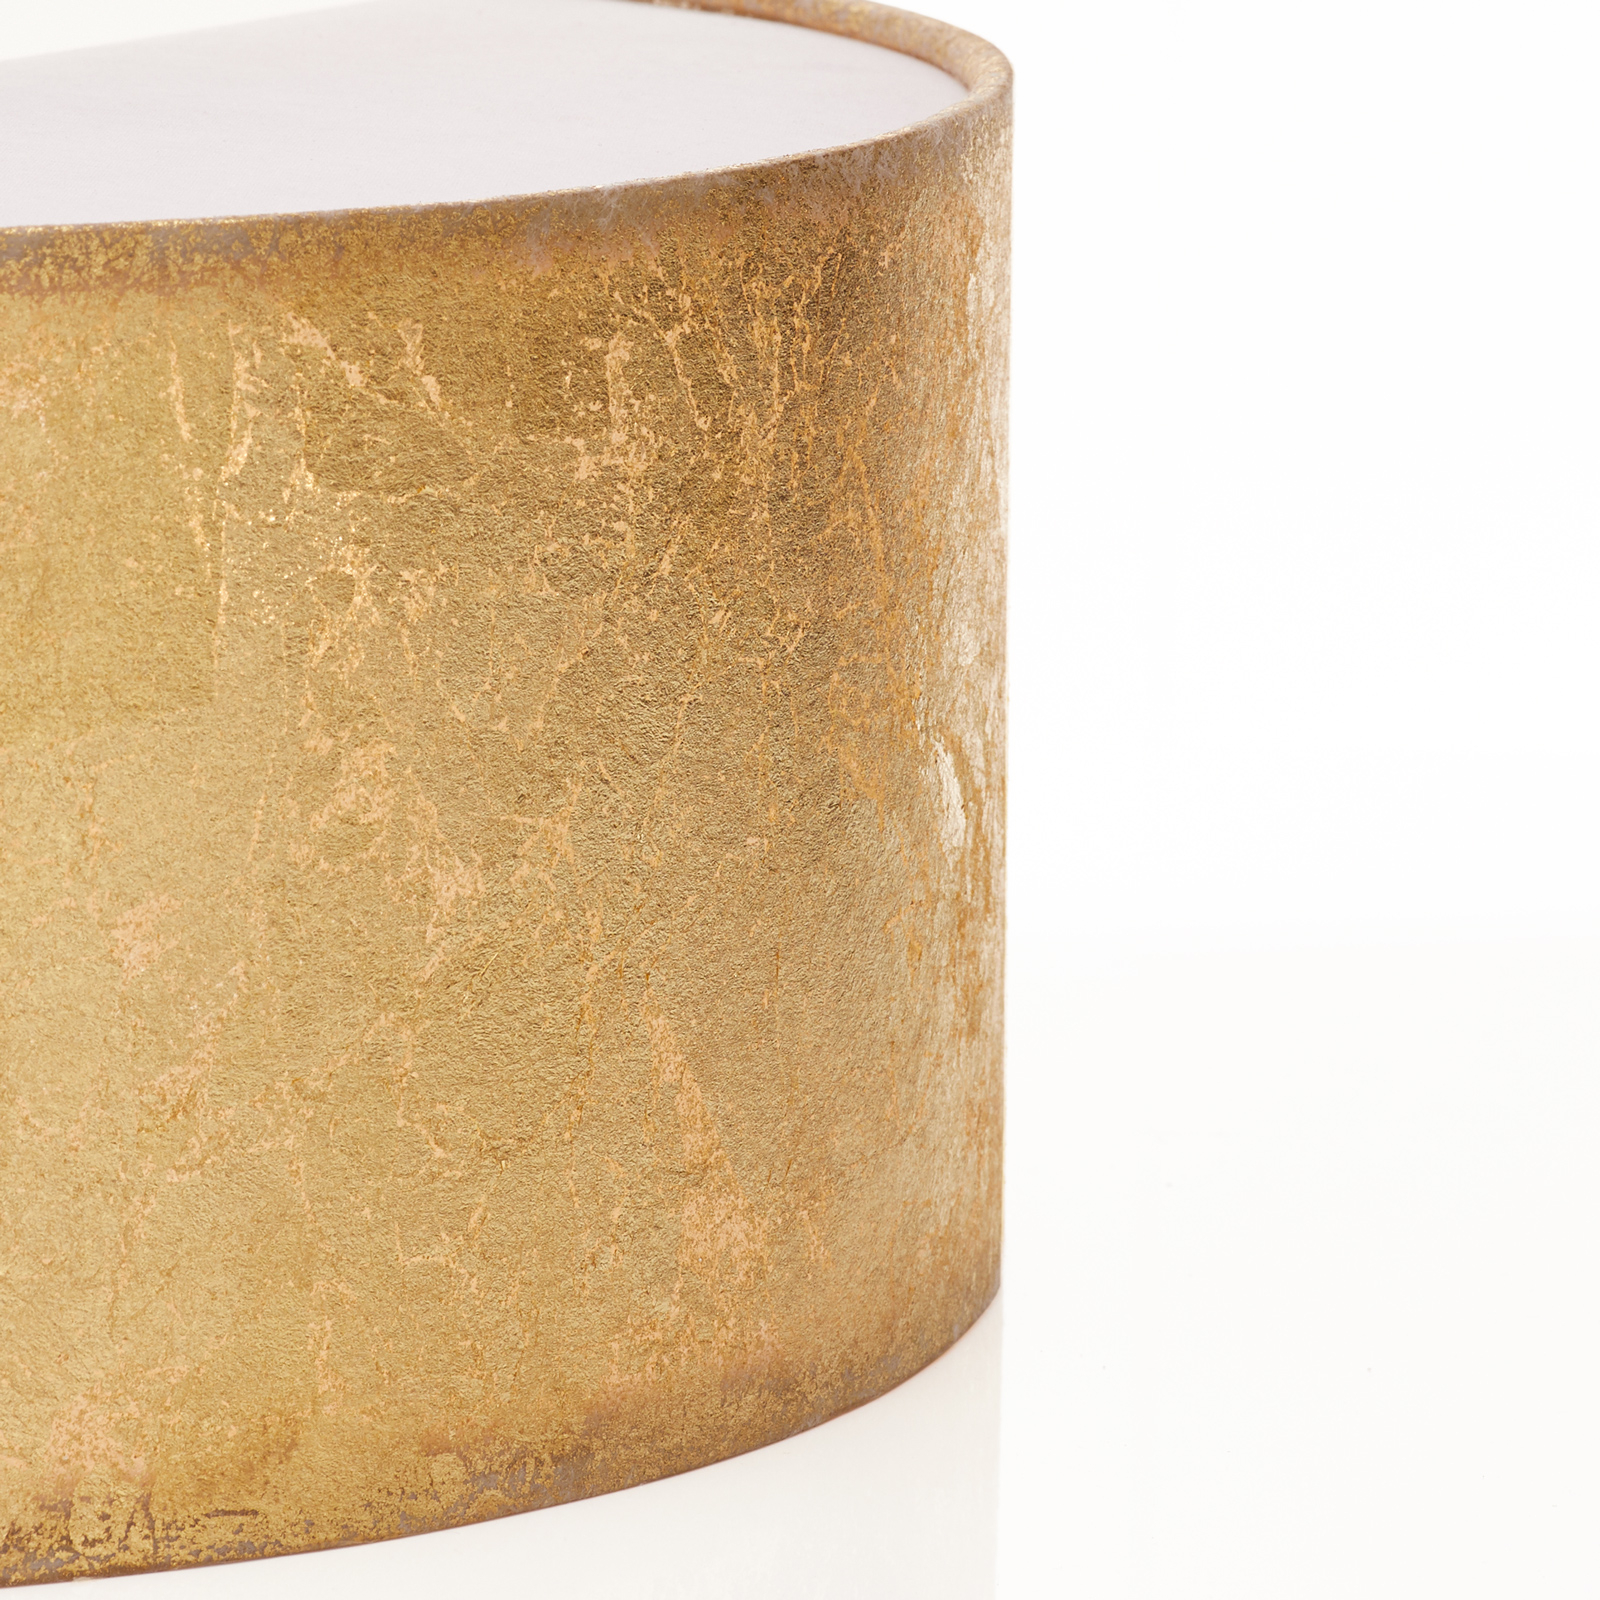 Alea LED wall light with gold leaf, dimmable